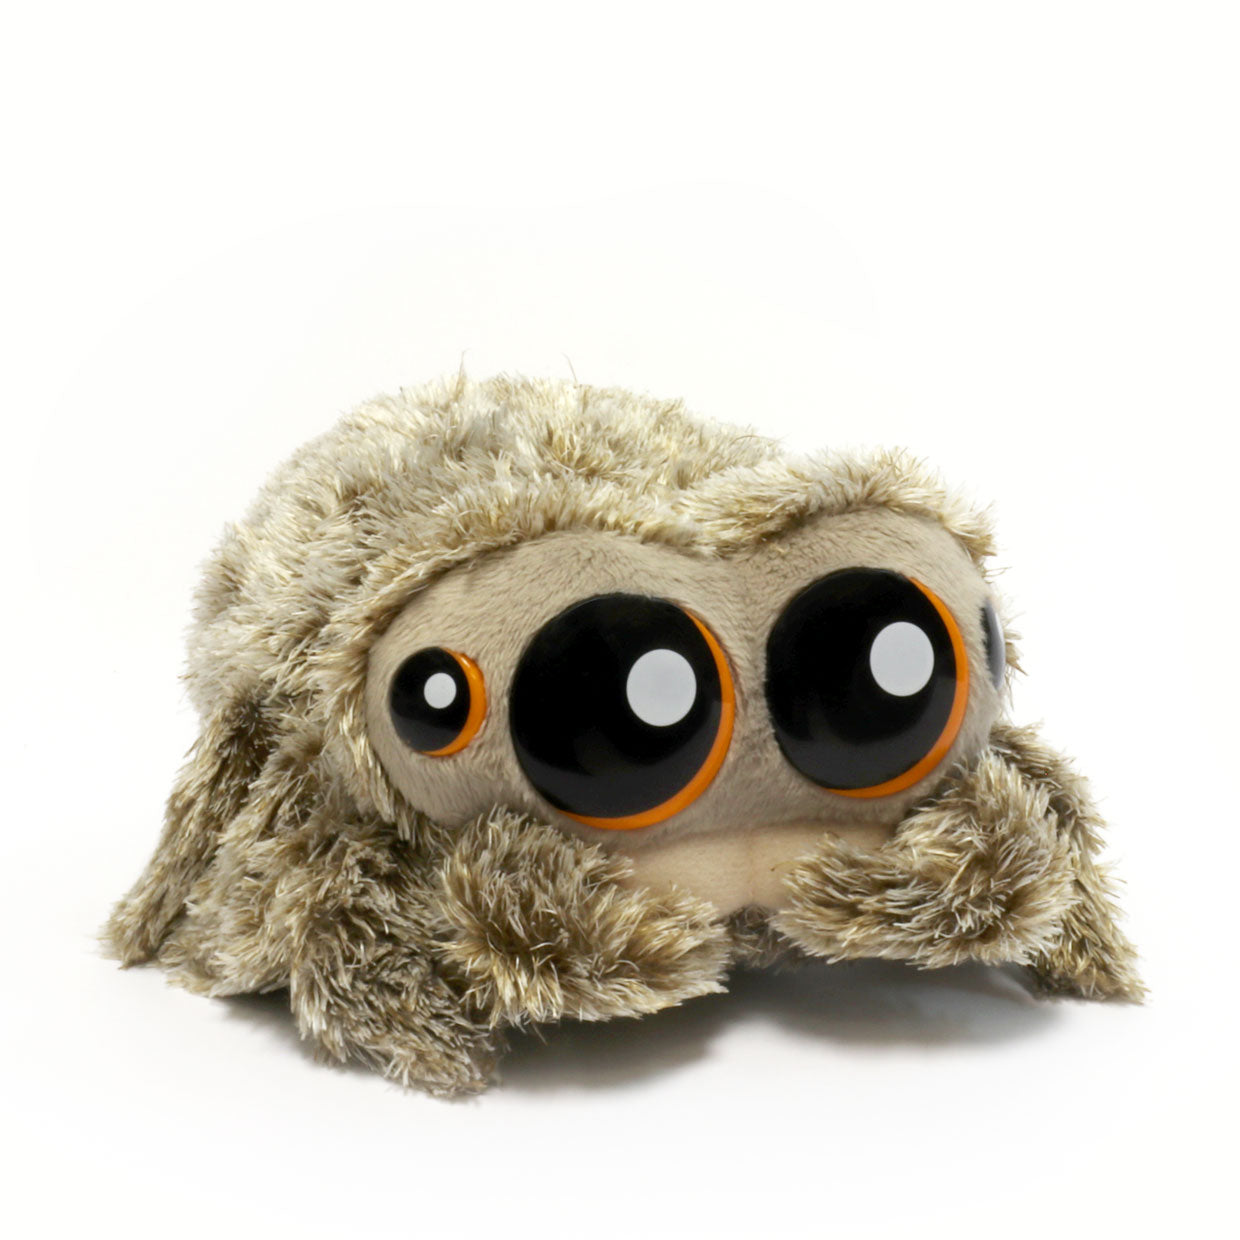 LucastheSpiderPlushie, Lucas the Spider Plushie, LucastheSpider Toys, Lucas the Spider Store, Authentic Lucas the Spider, Lucas the Spider Snuggle Edition, Lucas the Spider, Cute Spider, Lucas the Spider Soft Toy, Official Lucas the Spider Store,